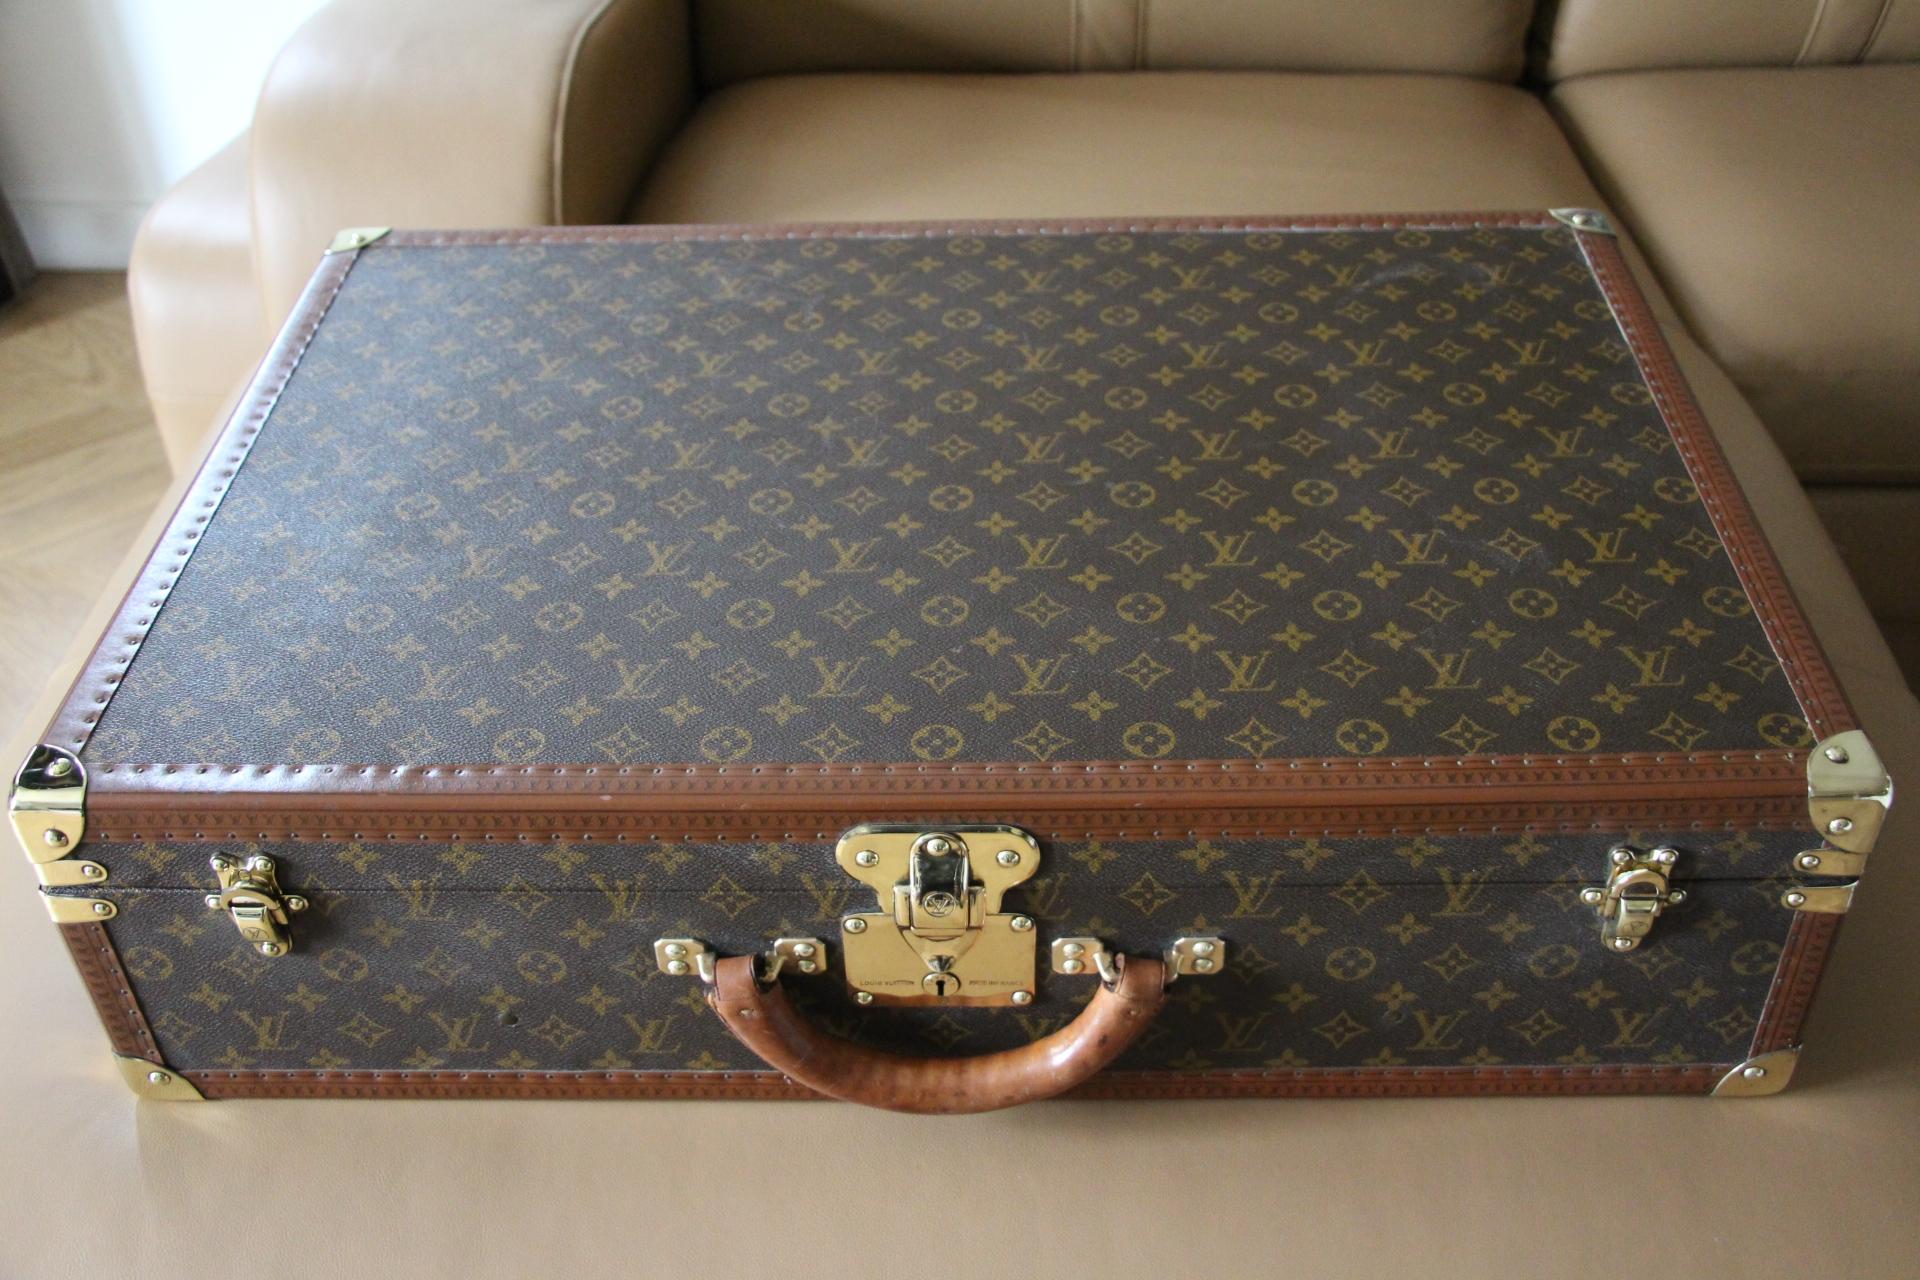 This very nice all original Louis Vuitton monogram suitcase features all solid brass fittings, solid brass LV stamped main lock and clasps. Its trims are marked Louis Vuitton all around. its trims It has got a very comfortable round leather handle,